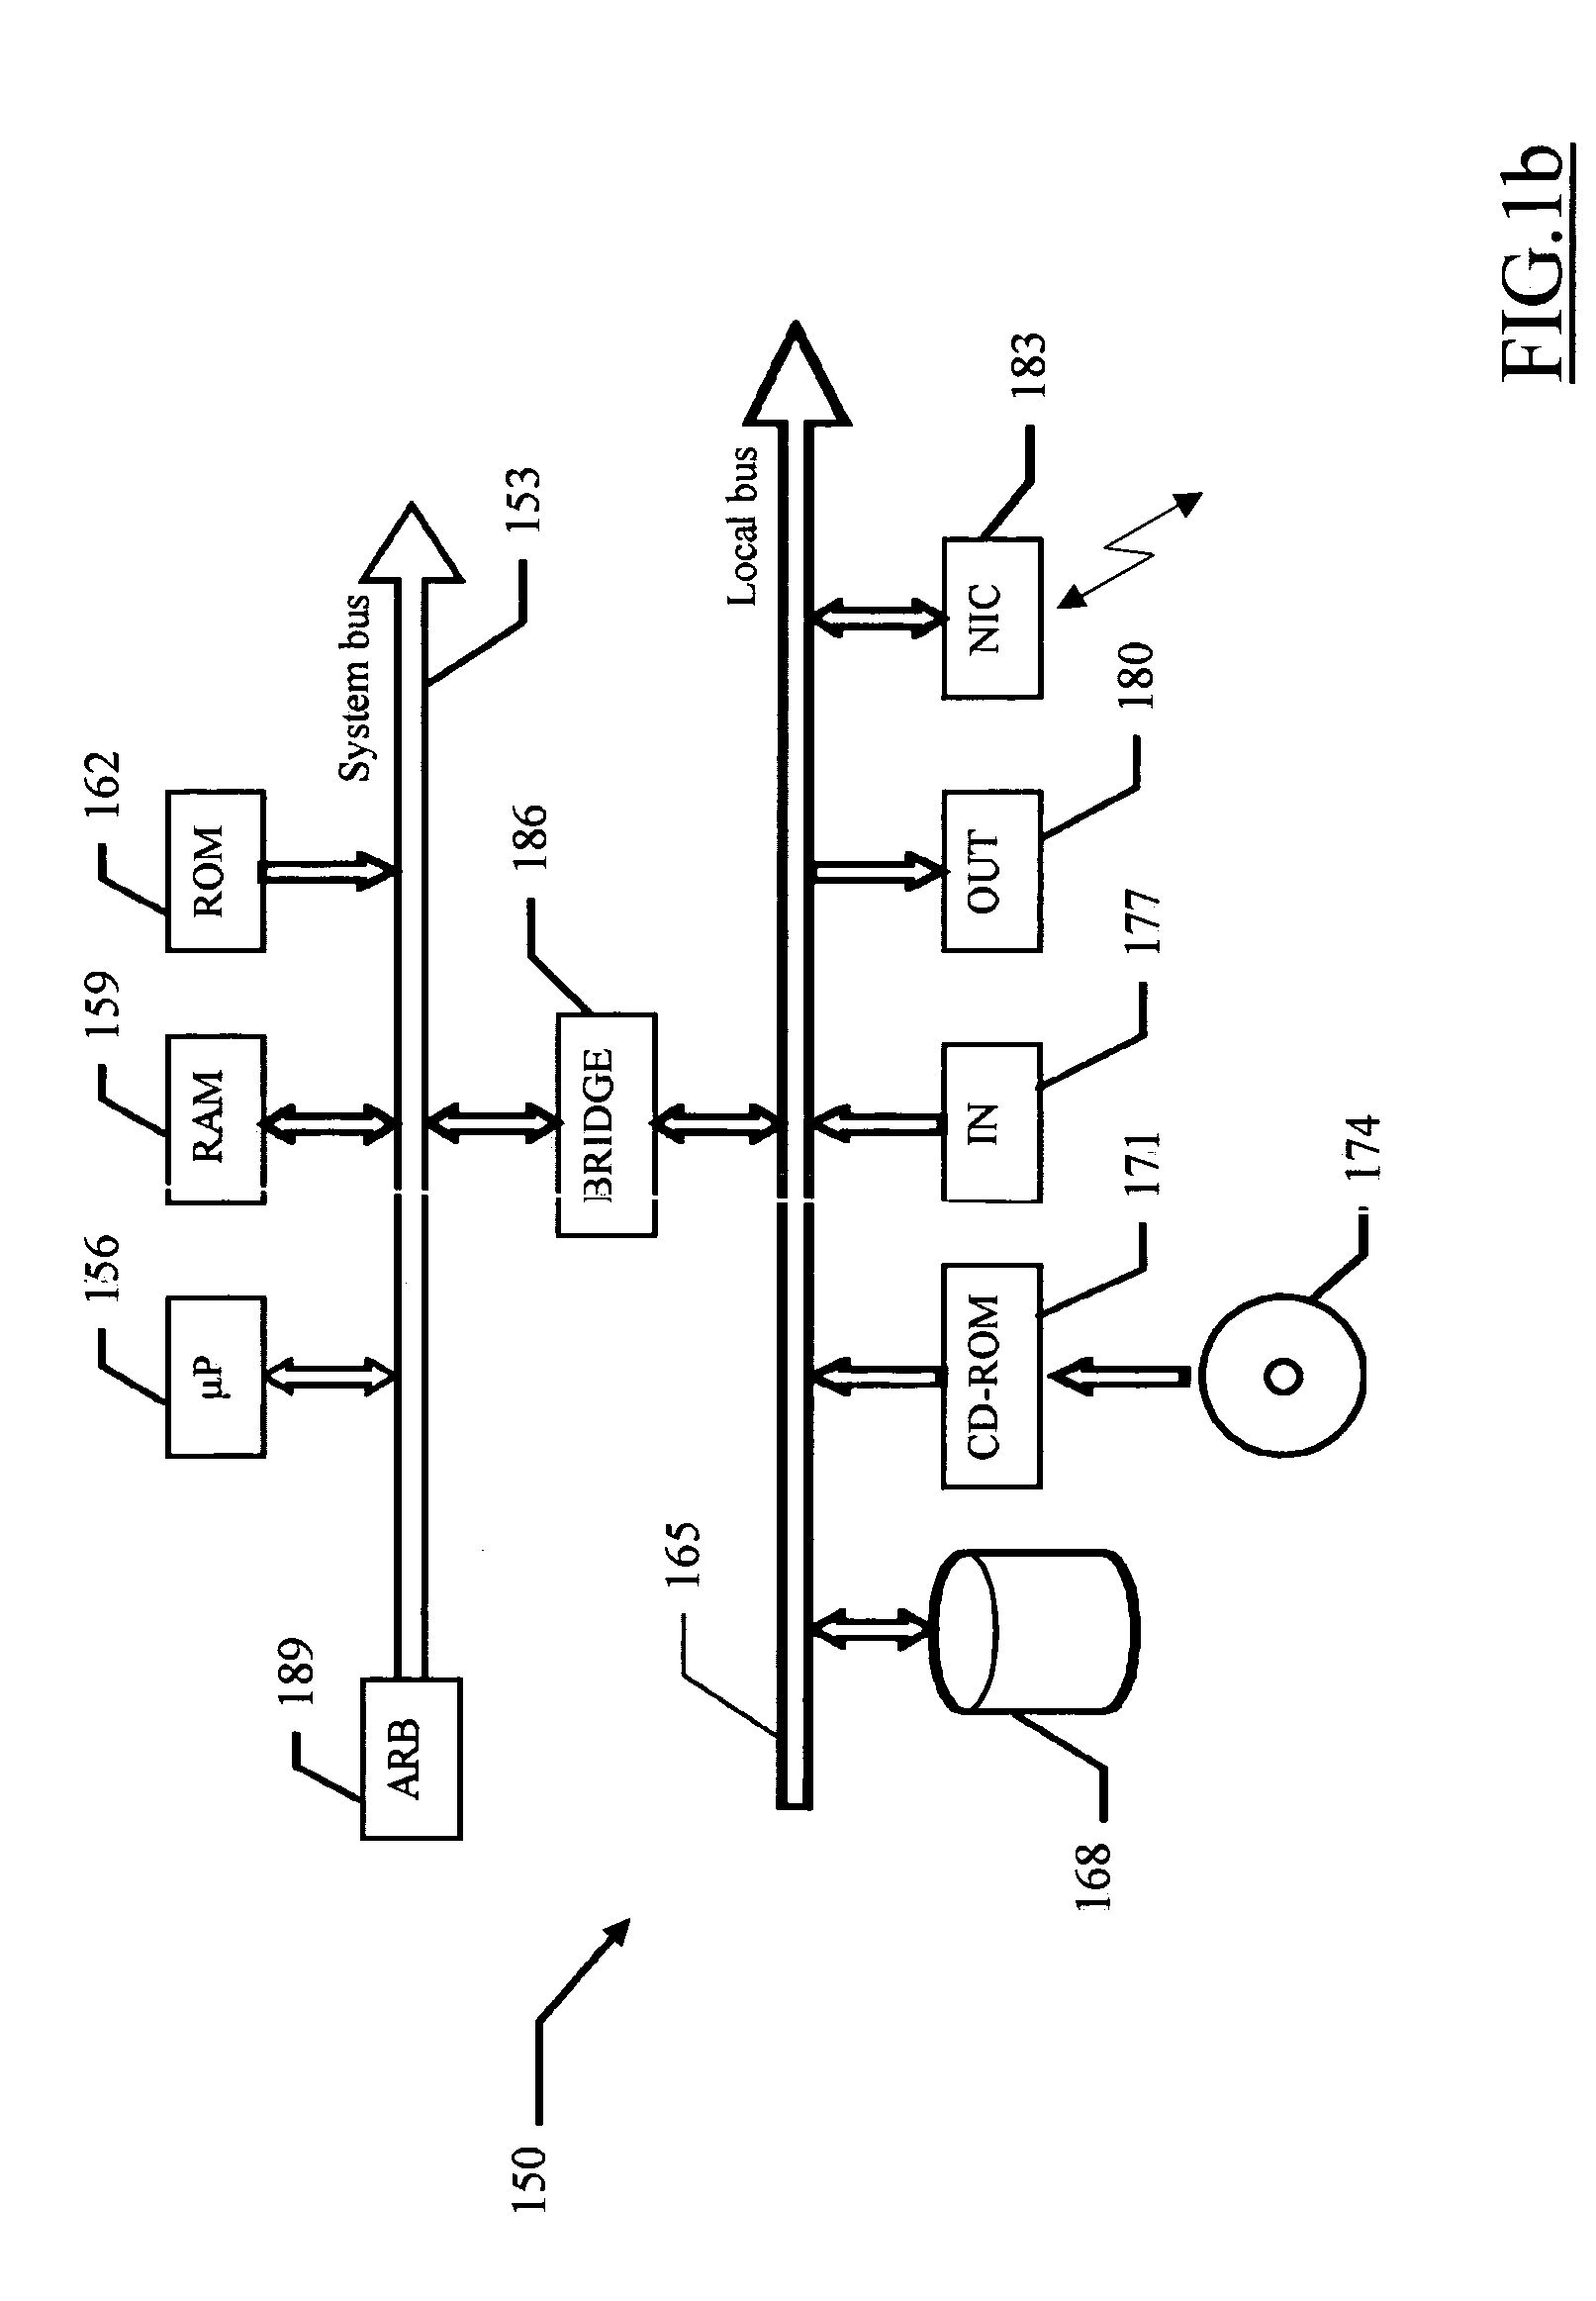 Method and apparatus for metering usage of software products using multiple signatures